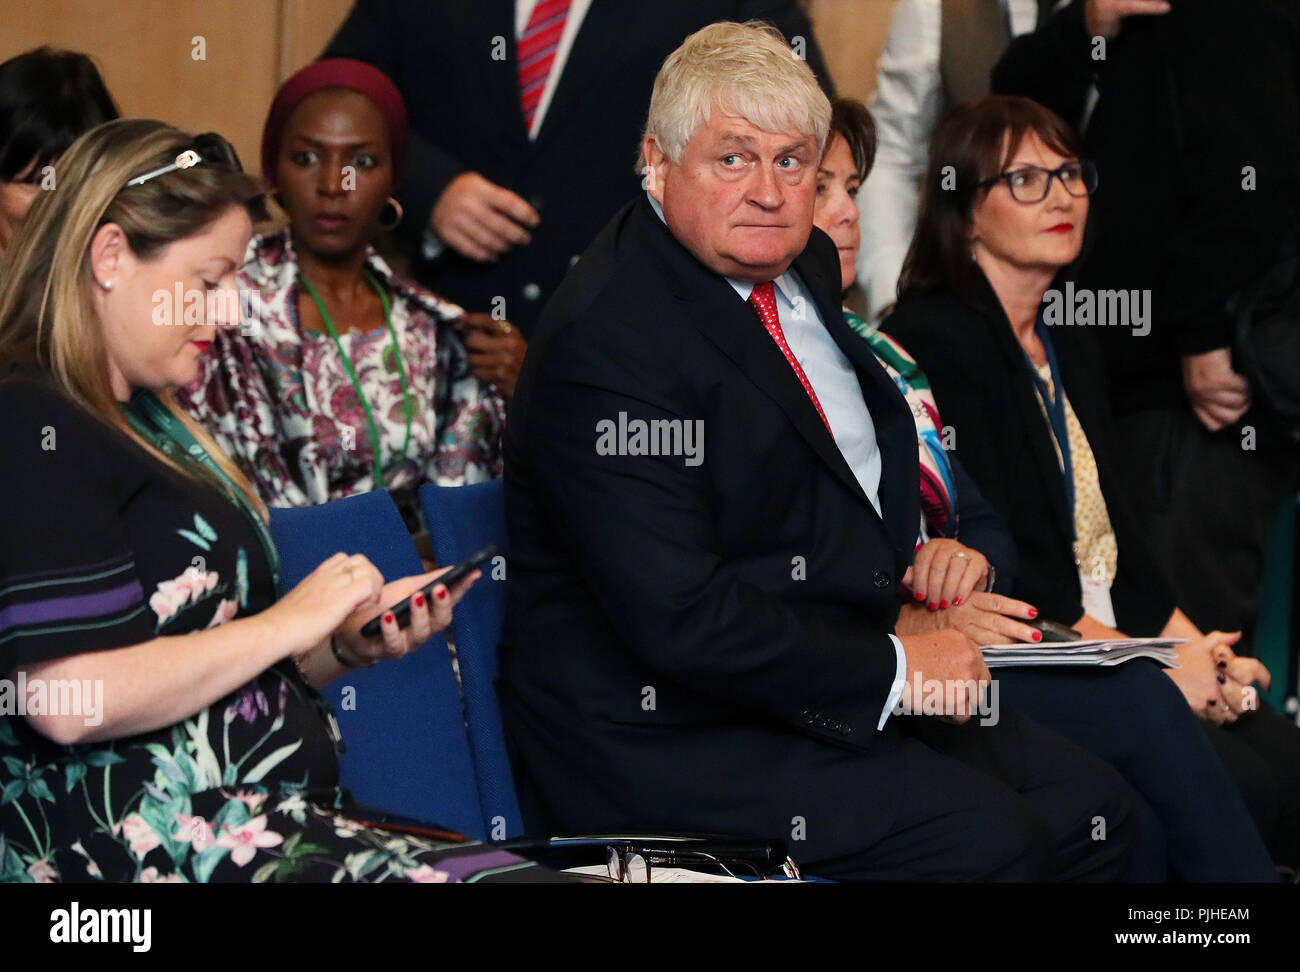 Business man Denis O'Brien attends a Concern Worldwide conference in Dublin. Stock Photo